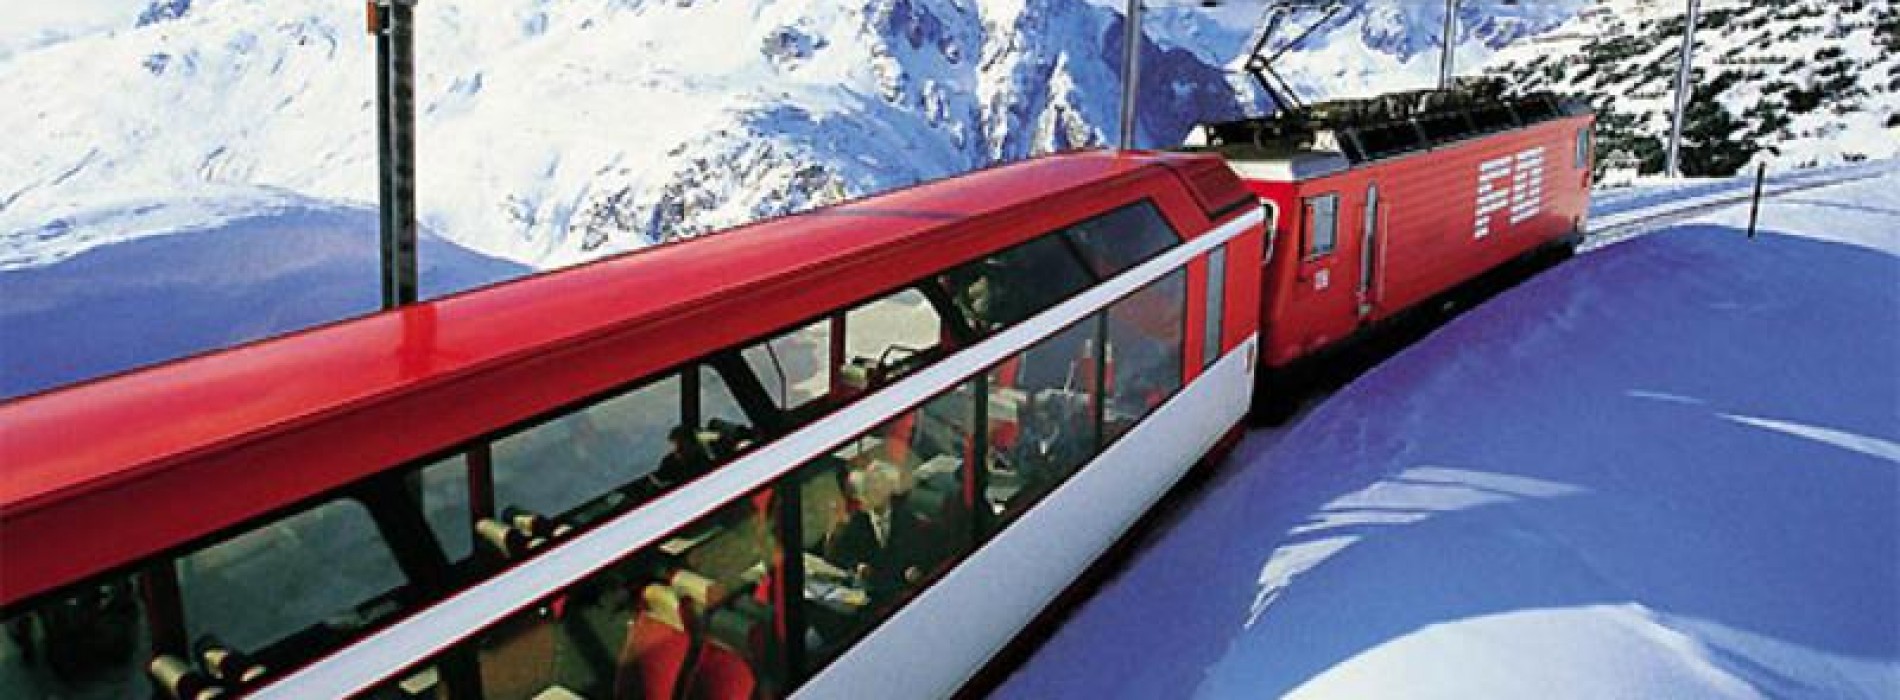 Call of panoramic mountain rides and Swiss watch-making tour